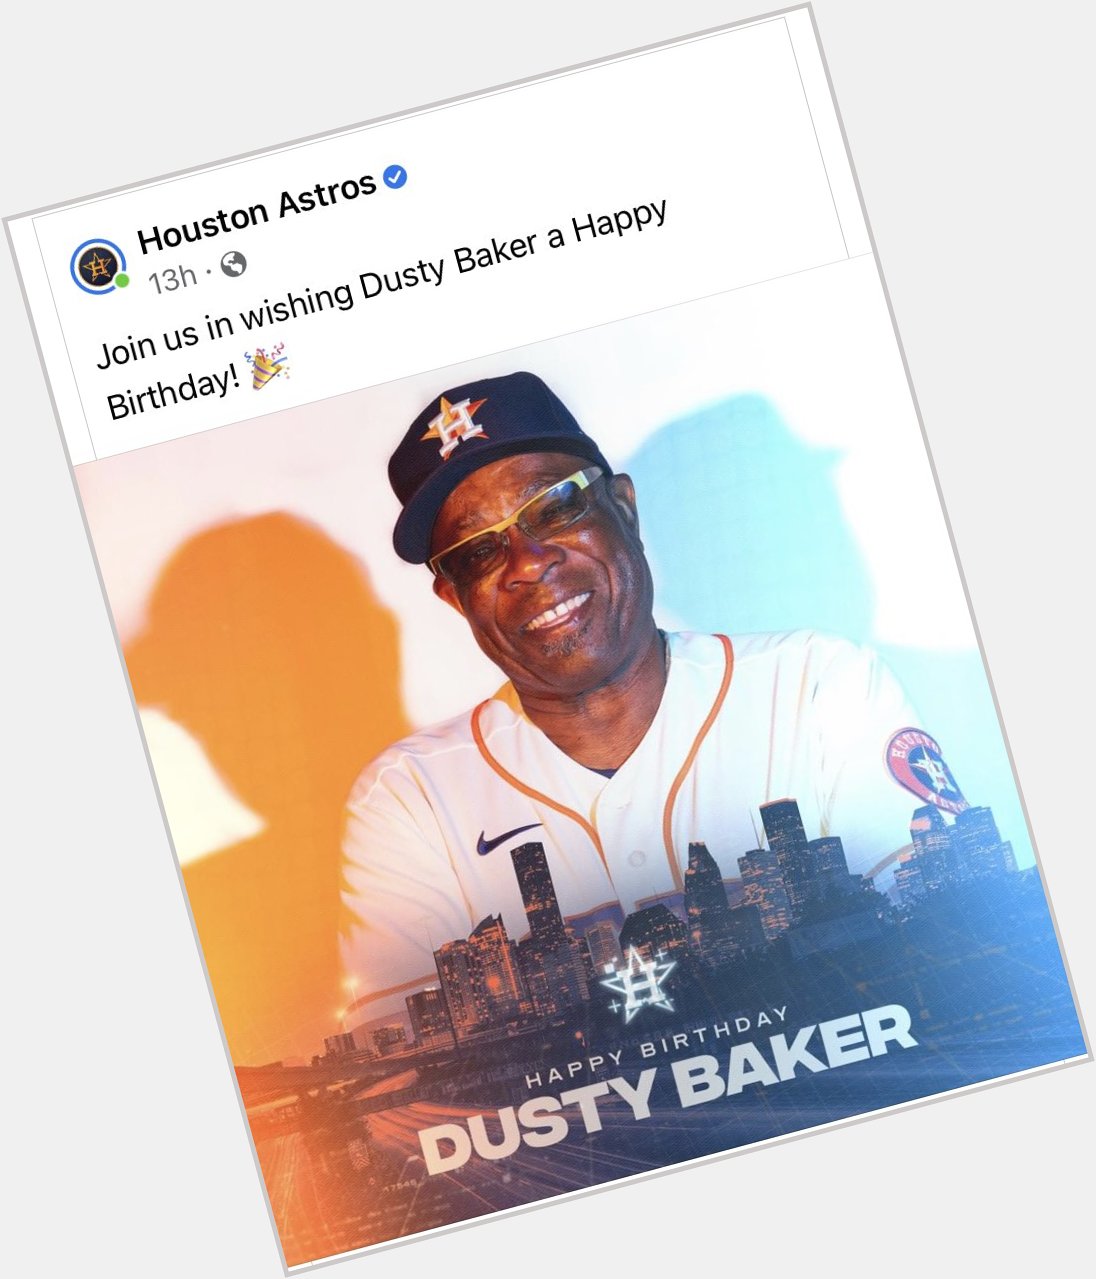 A belated  by 6 minutes Happy Birthday to Dusty Baker!!! 